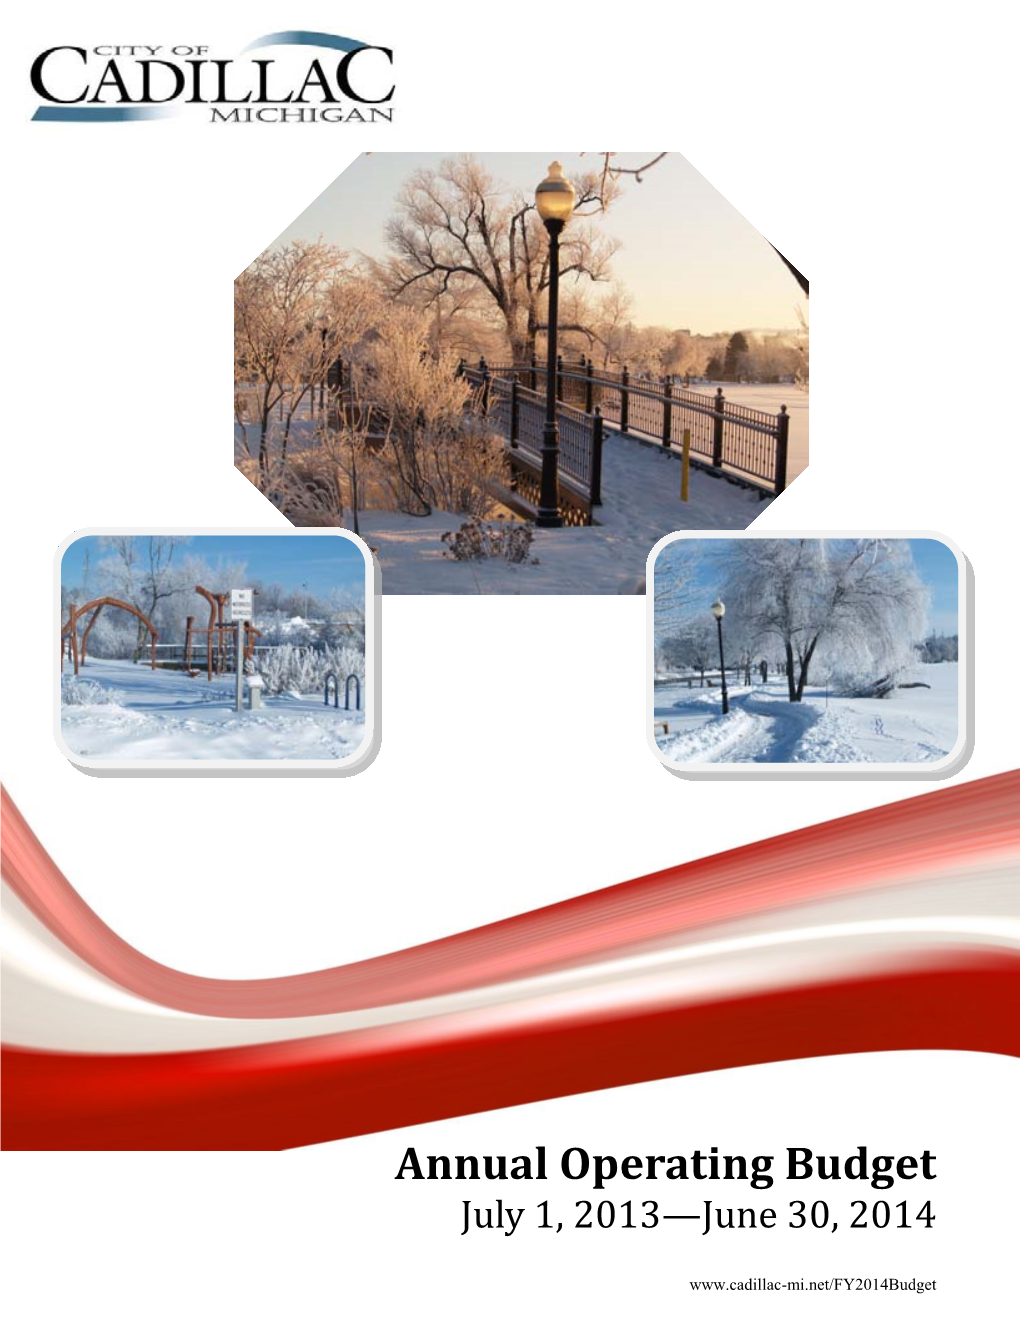 Annual Operating Budget July 1, 2013—June 30, 2014